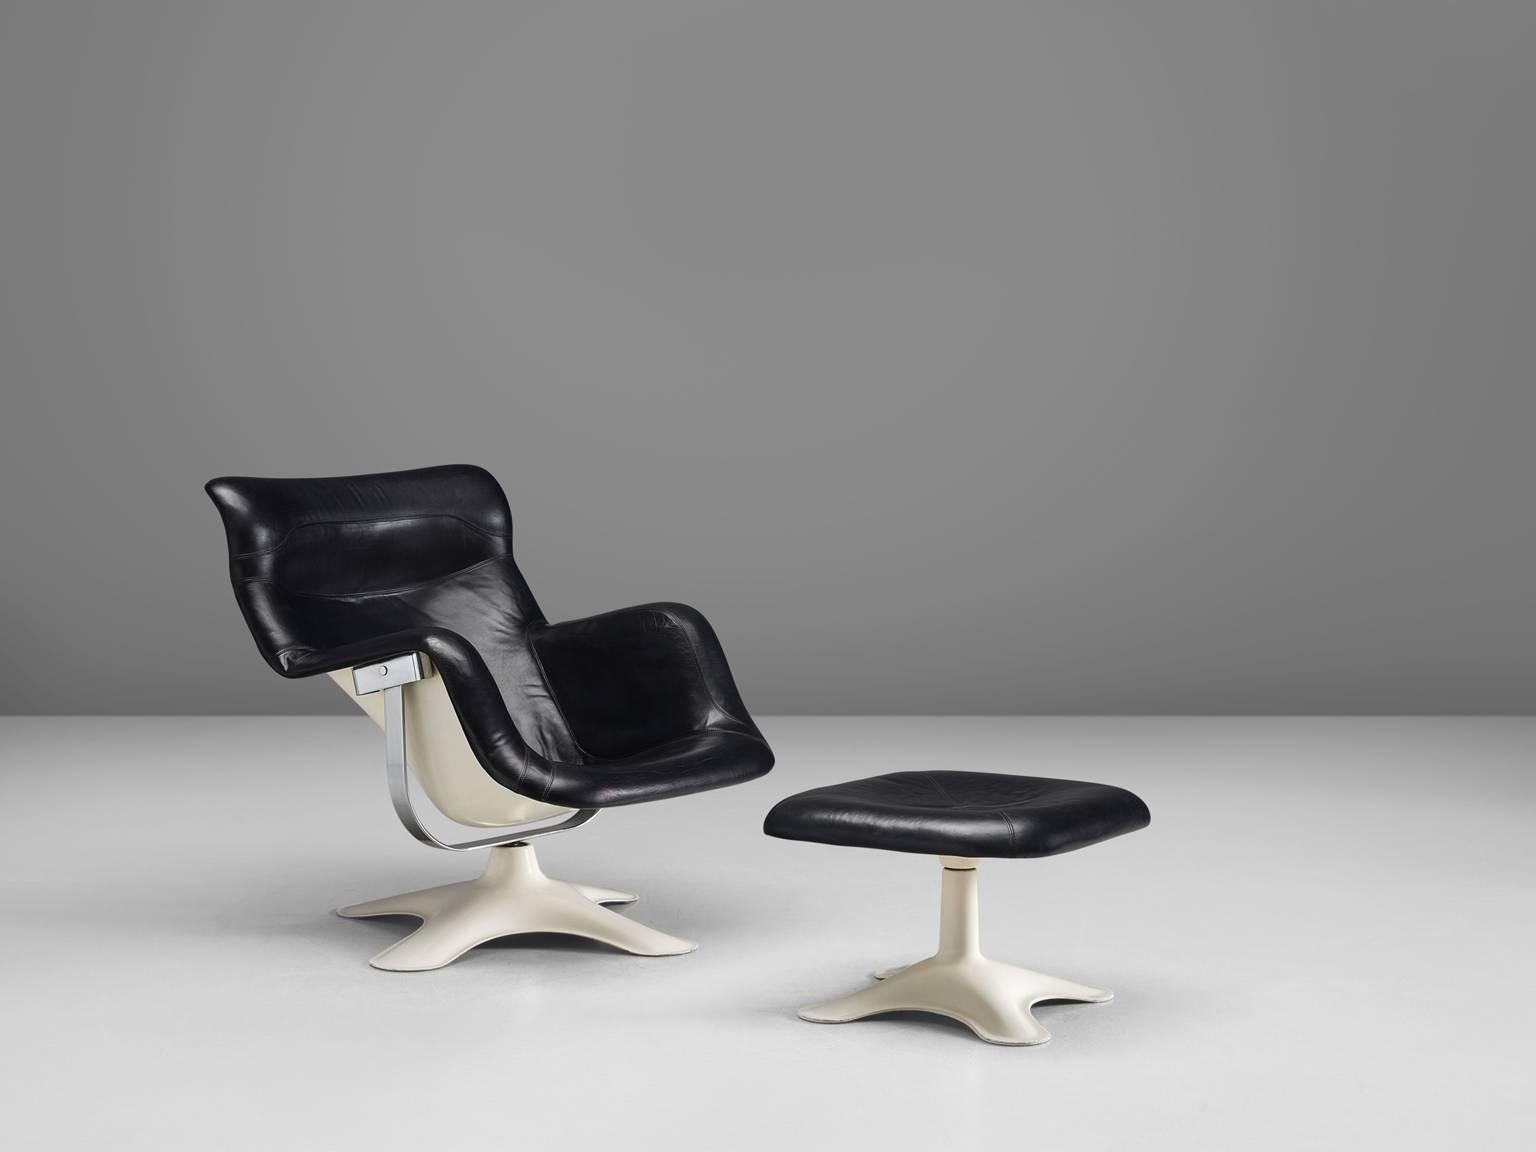 'Karuselli' lounge chair, in black leather, fiberglass and white polyester, by Yrjö Kukkapuro for Haimi, Finland, 1960s.

Organic shaped lounge chair by Finnish designer Yrjö Kukkapuro. This chair consist of a moulded plastic shell with thick